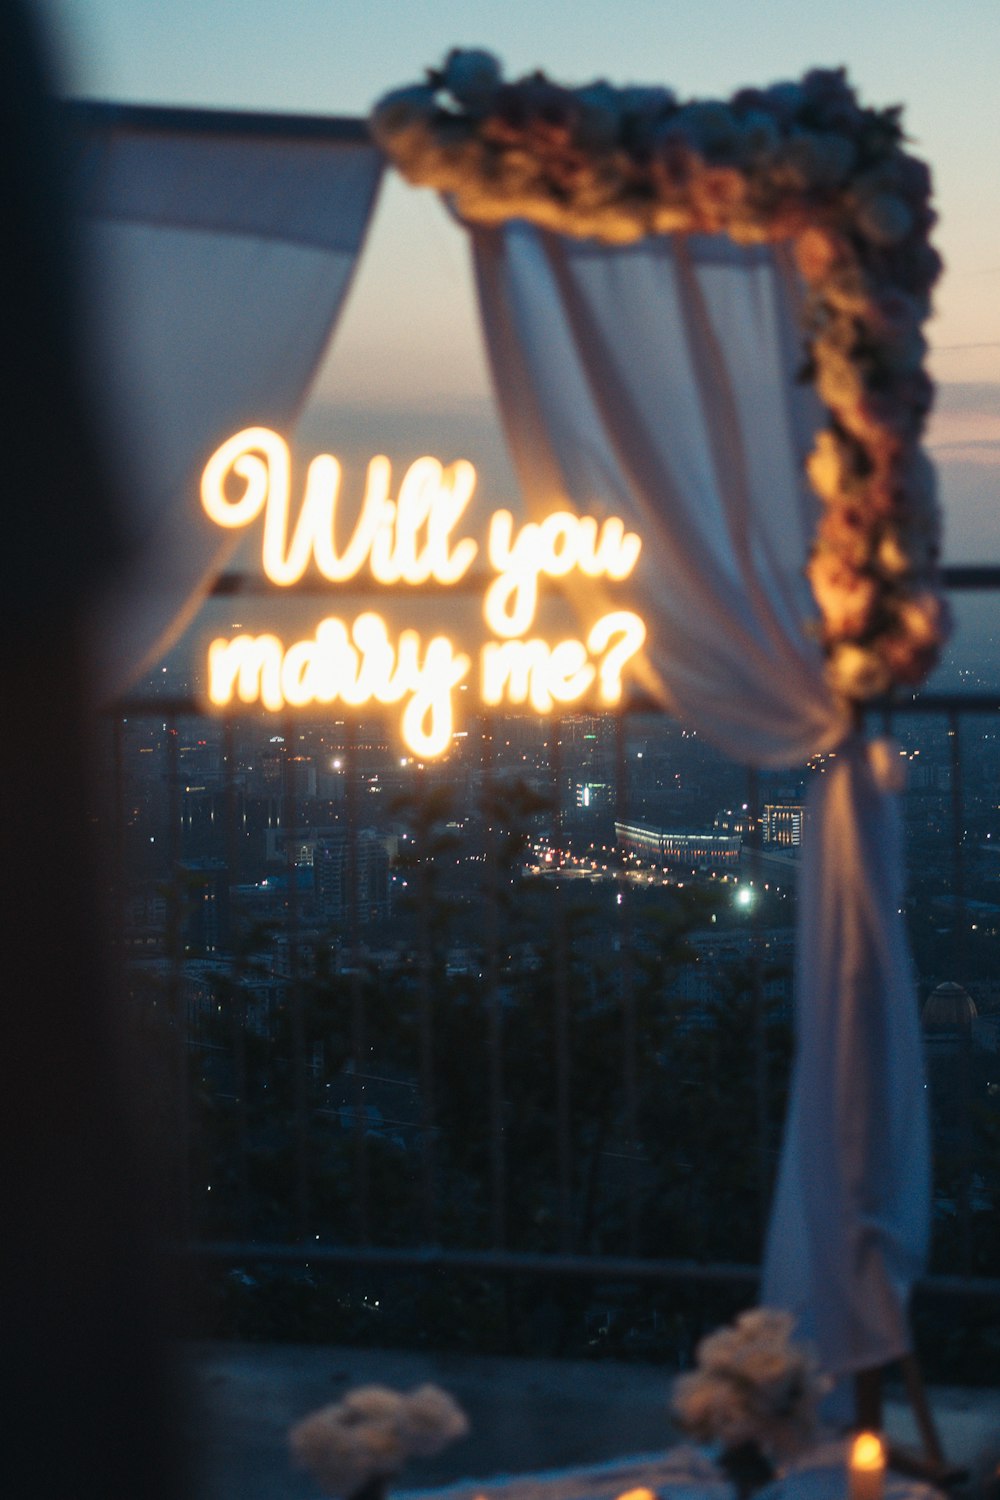 a sign that says will you marry me?